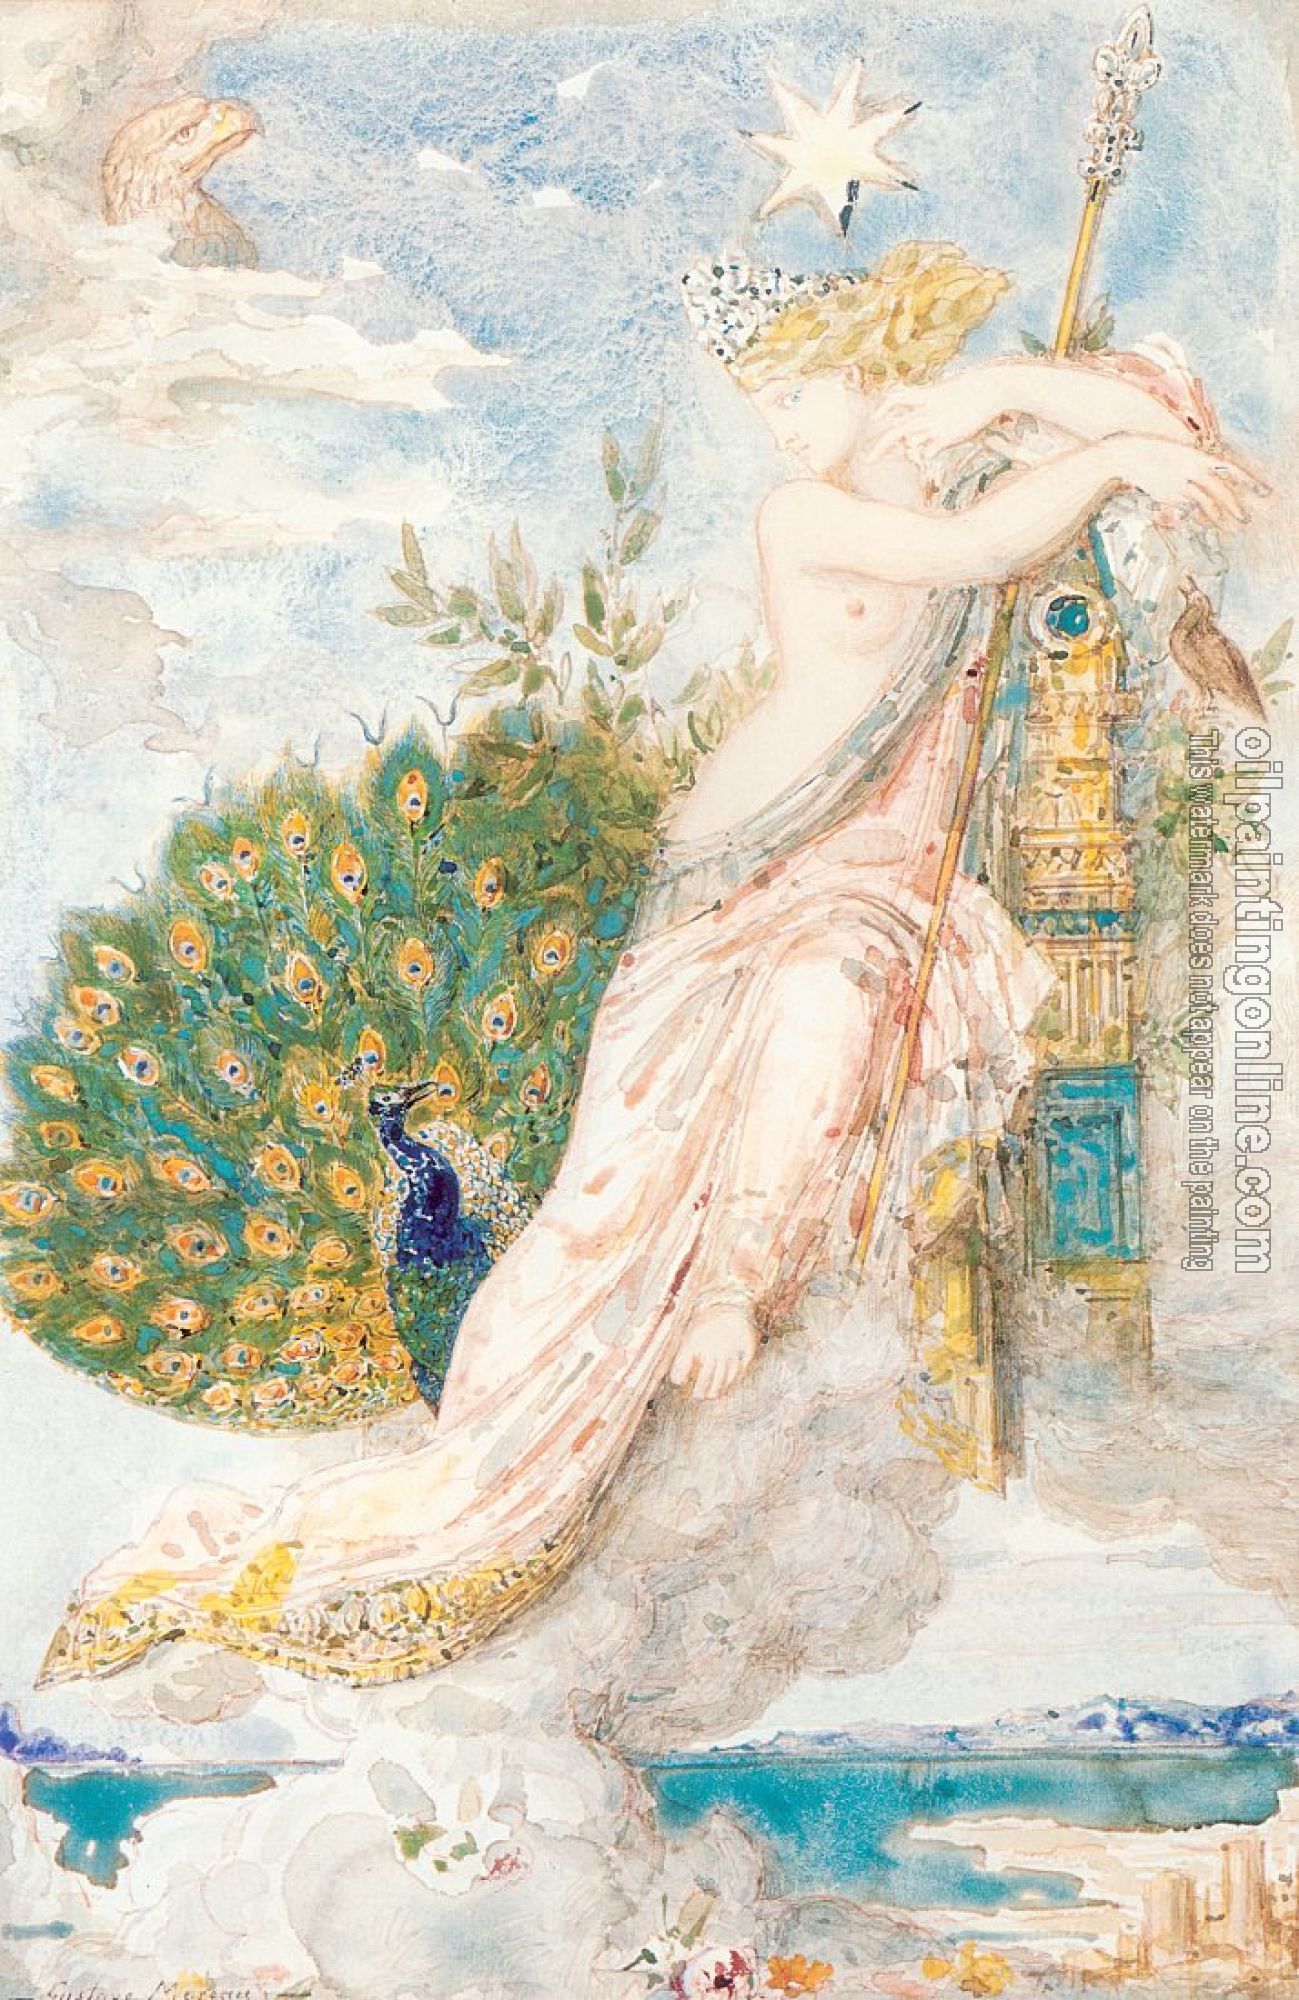 Moreau, Gustave - The Peacock Compaining to Juno